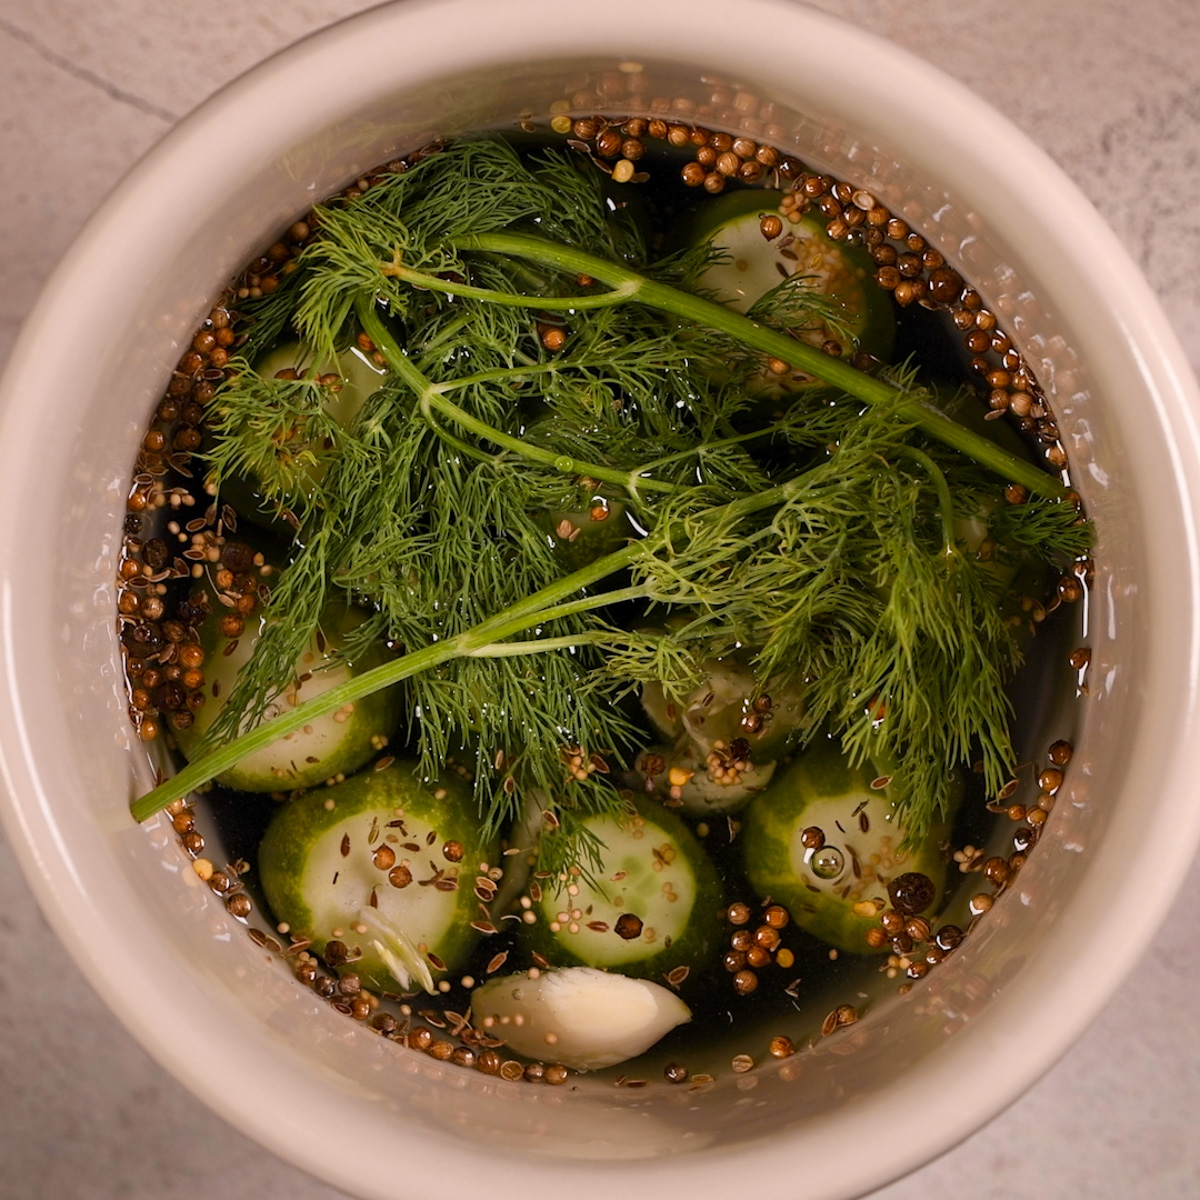 Add dill to the pickling crock.